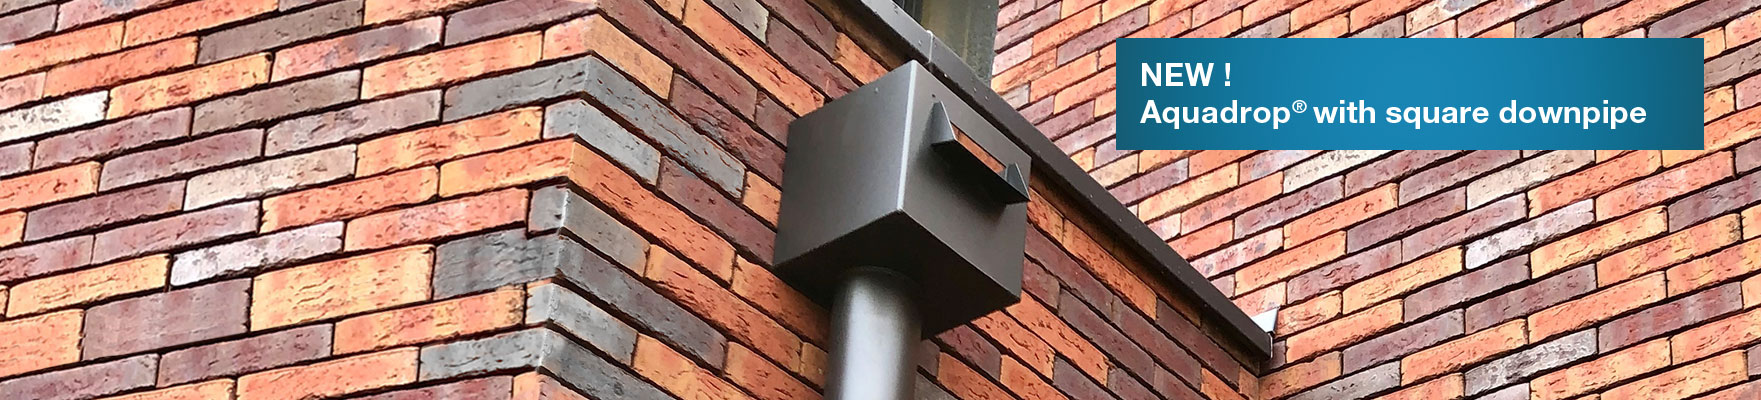 Aquadrop rainwater collector and downpipe on a brick wall